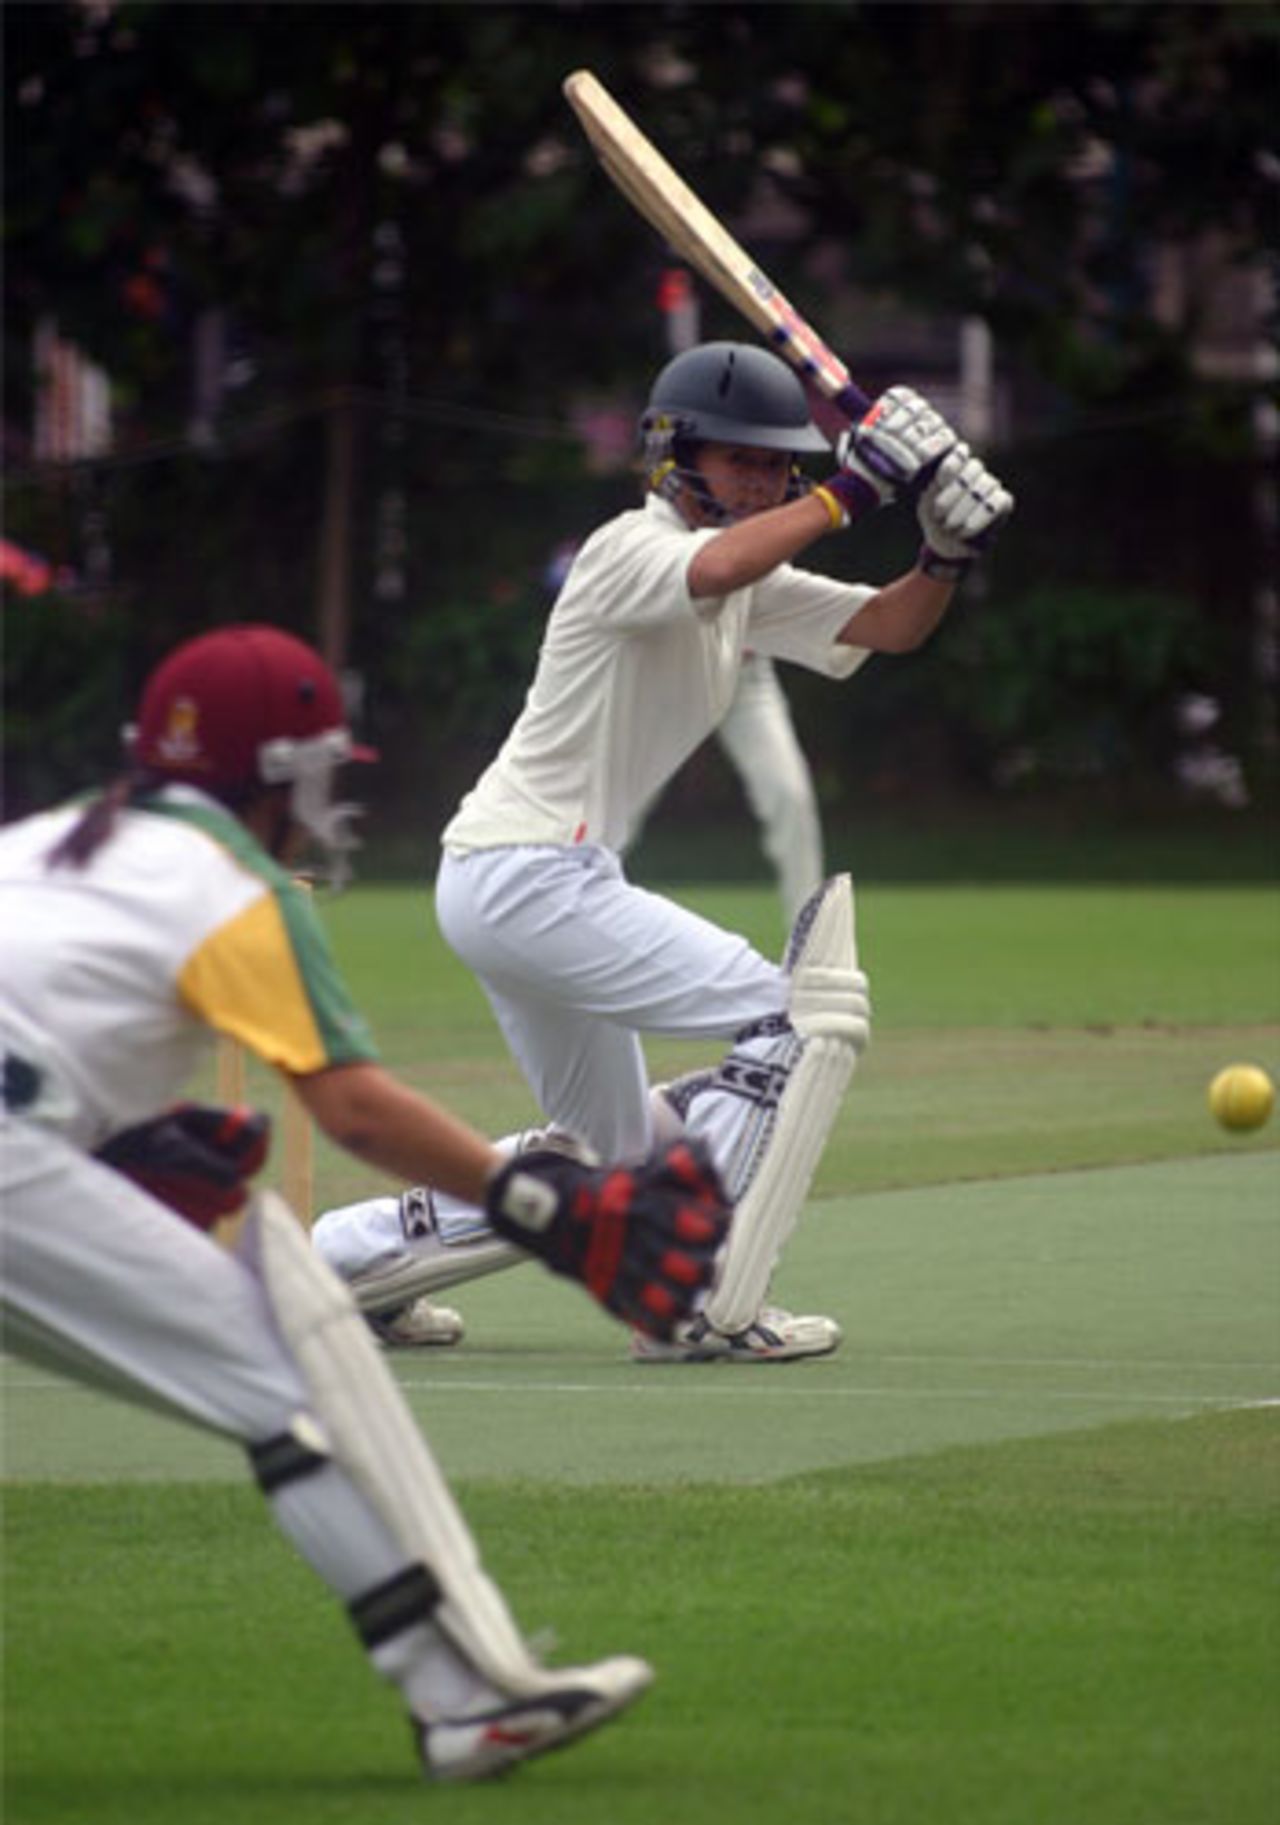 Natasha Miles plays it wide of Kim Leung during the Women's Tony Turner Trophy 2005 played at Kowloon Cricket Club on 18th September 2005